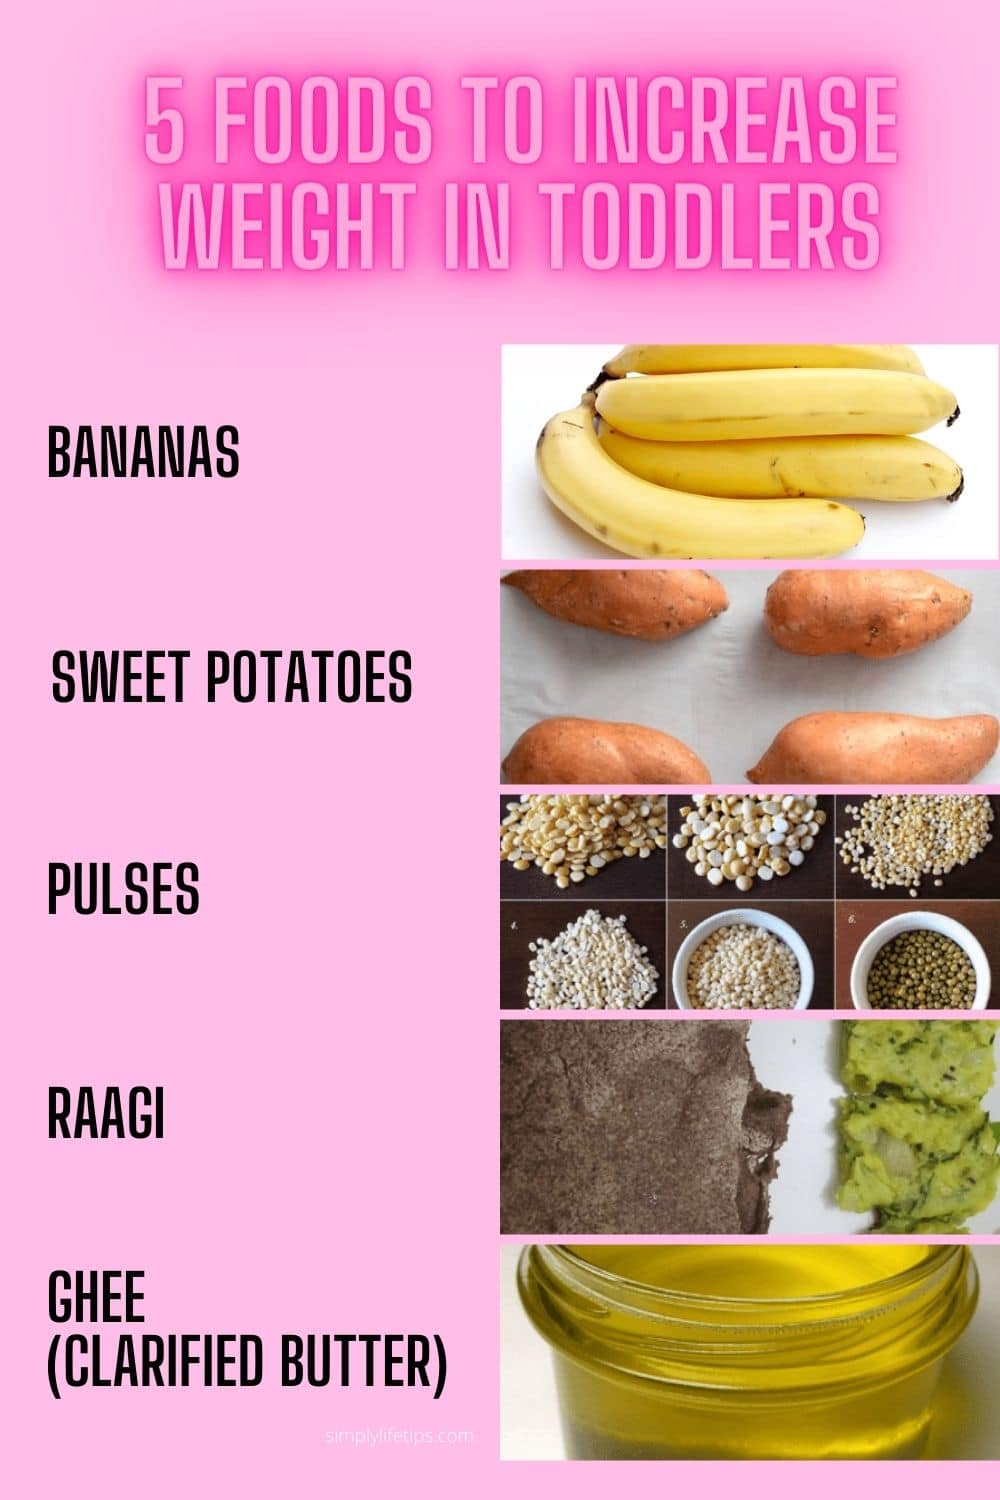 Foods for increase weight in toddlers